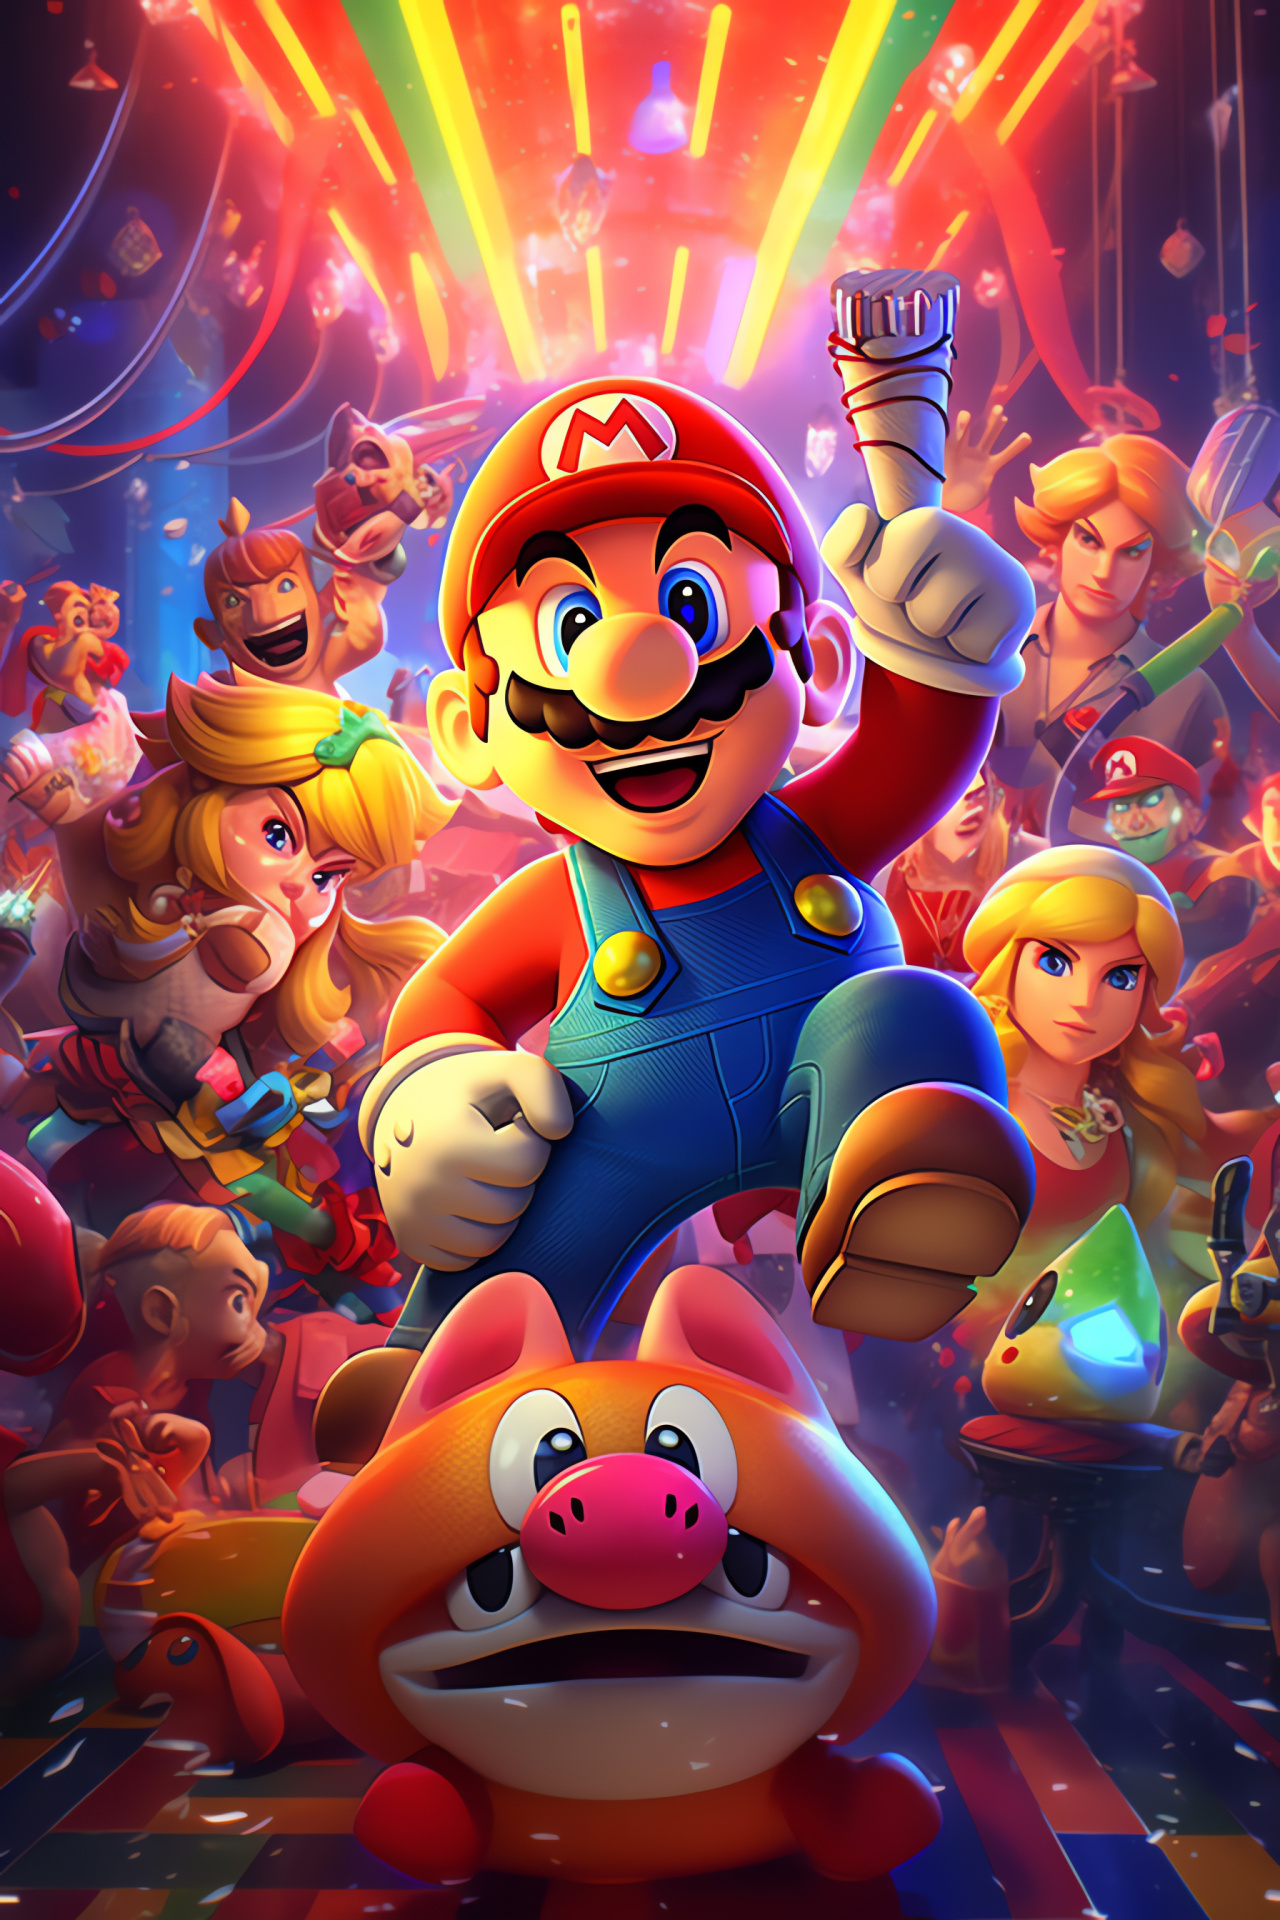 Celebration event, Super Mario, Hyrule warrior Link, Electric mouse Pikachu, Party atmosphere, HD Phone Image